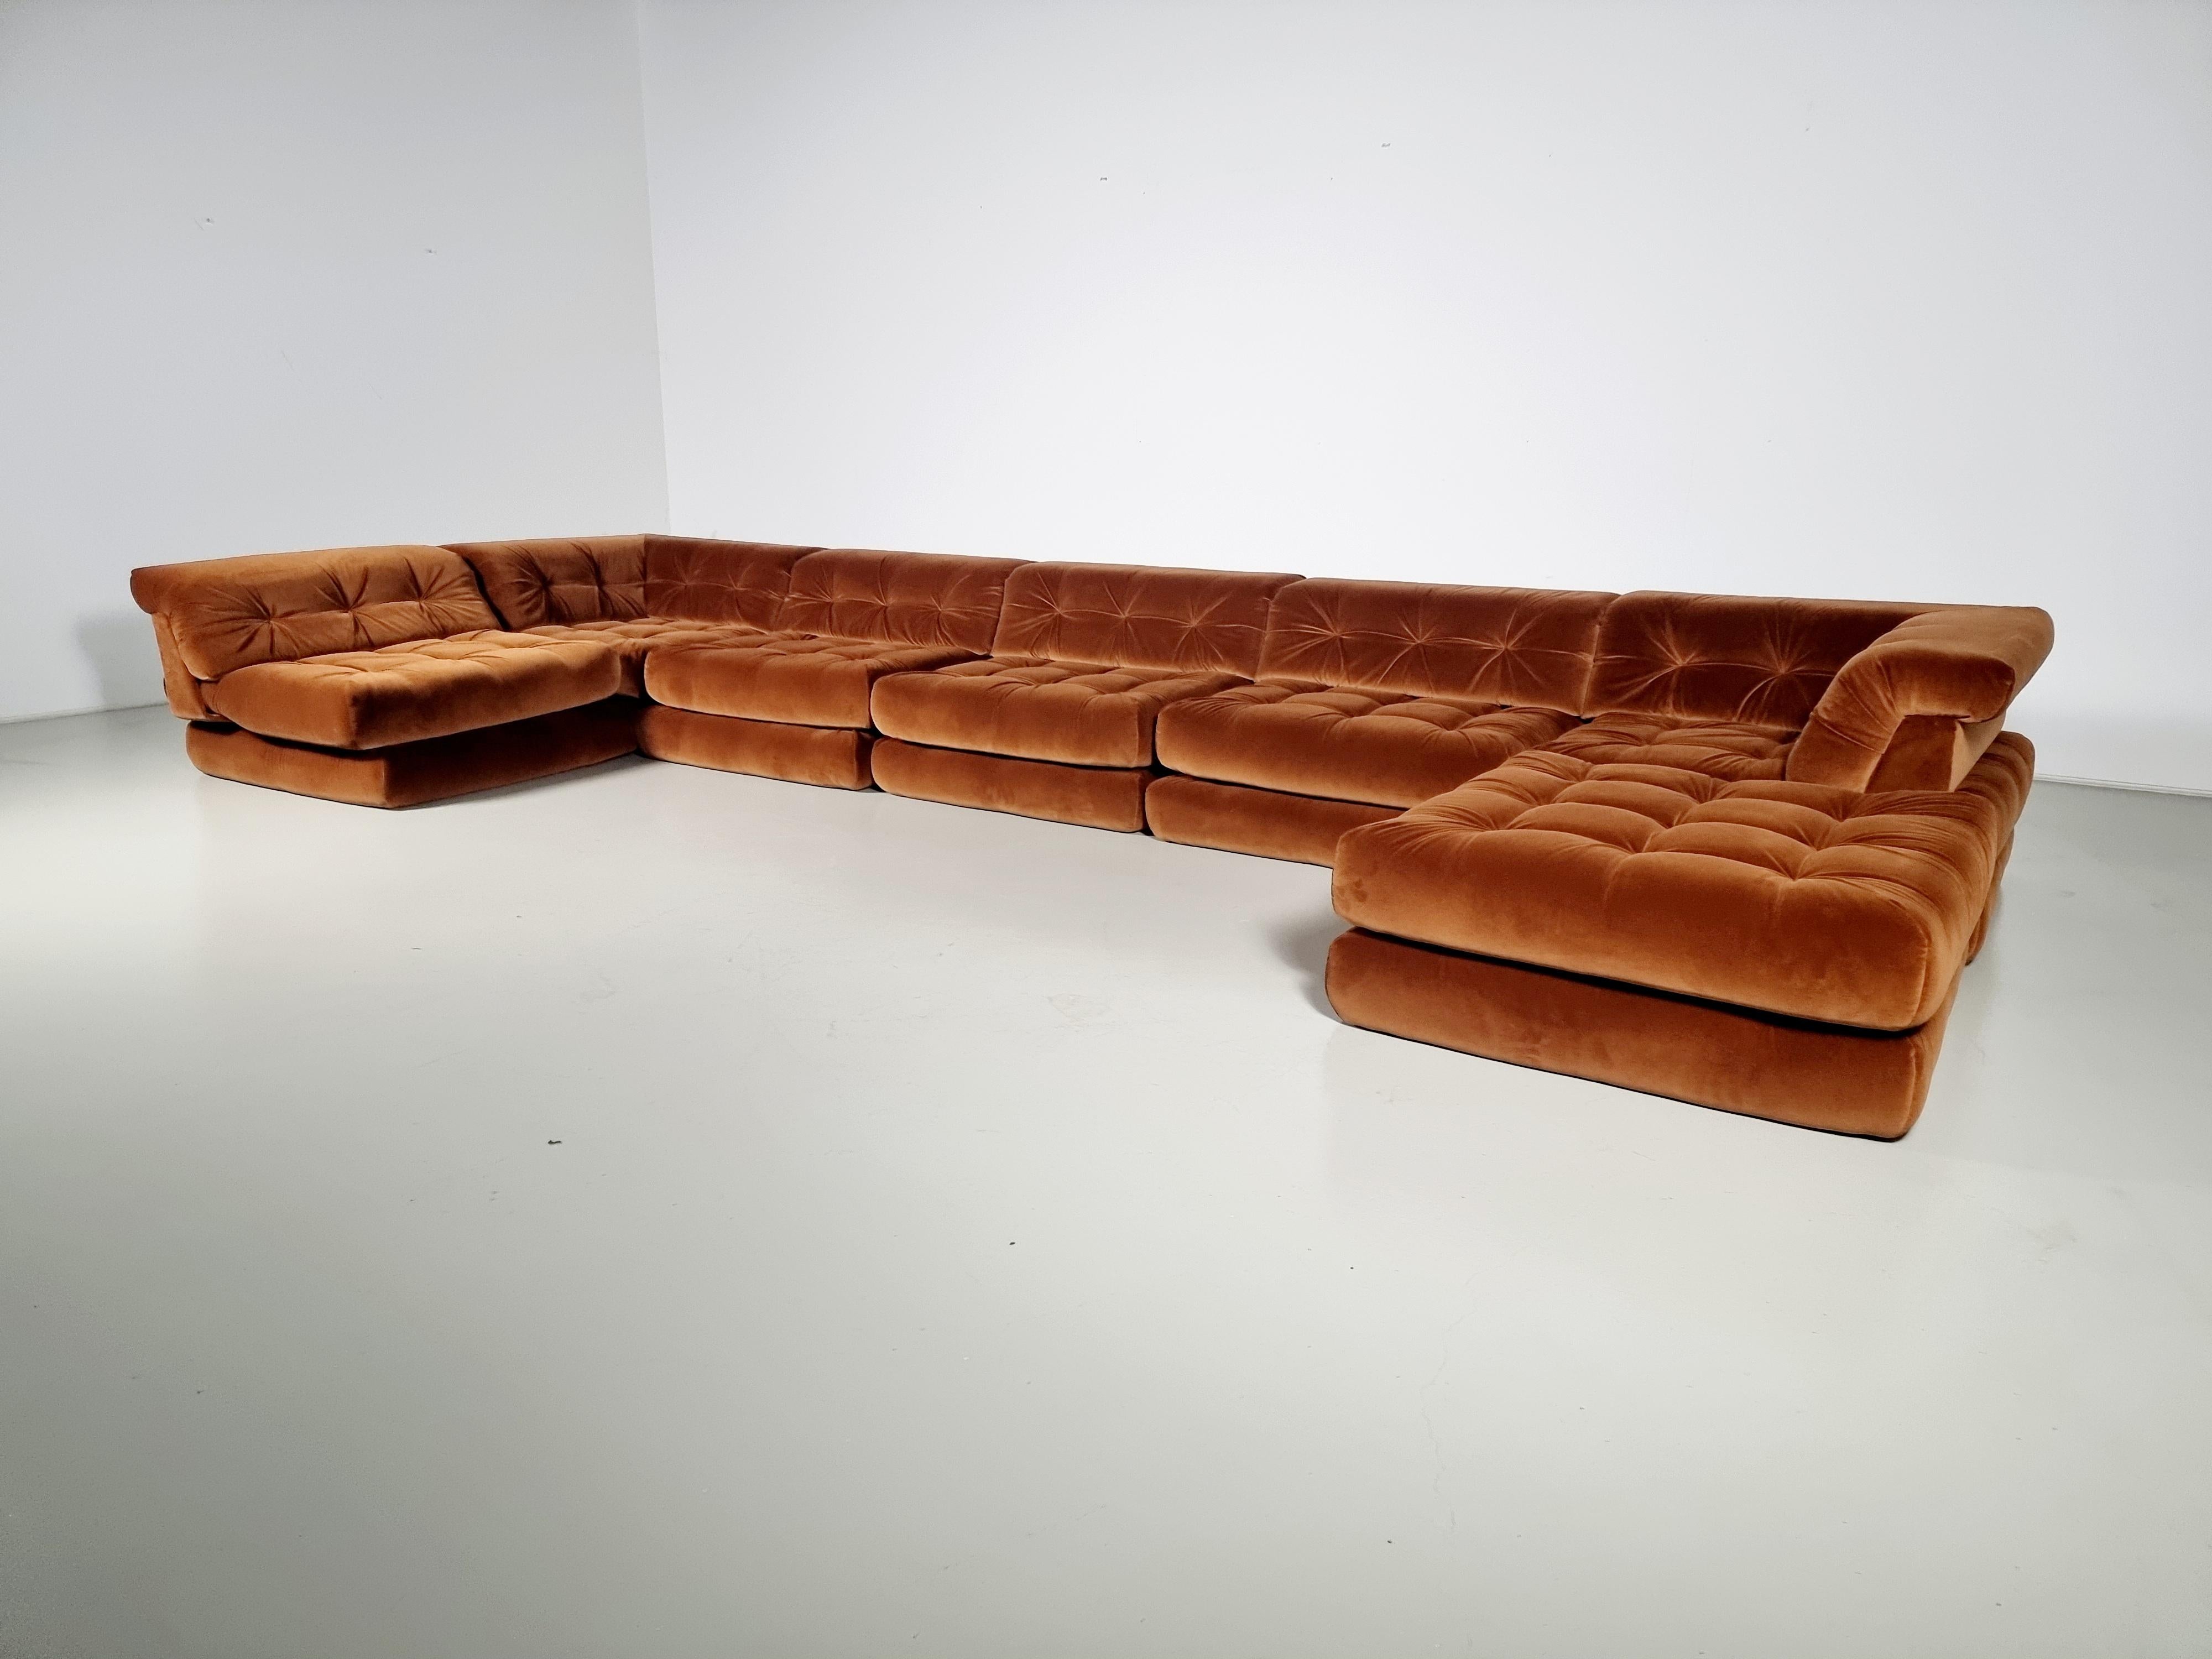 1st Edition Mah Jong modular landscape sofa set by Hans Hopfer, designed in 1971 for Roche Bobois. It features multiple cushions that can be arranged in an endless number of ways, This set includes 14 cushions and 6 backrests. 

Hopfer’s Mah Jong is